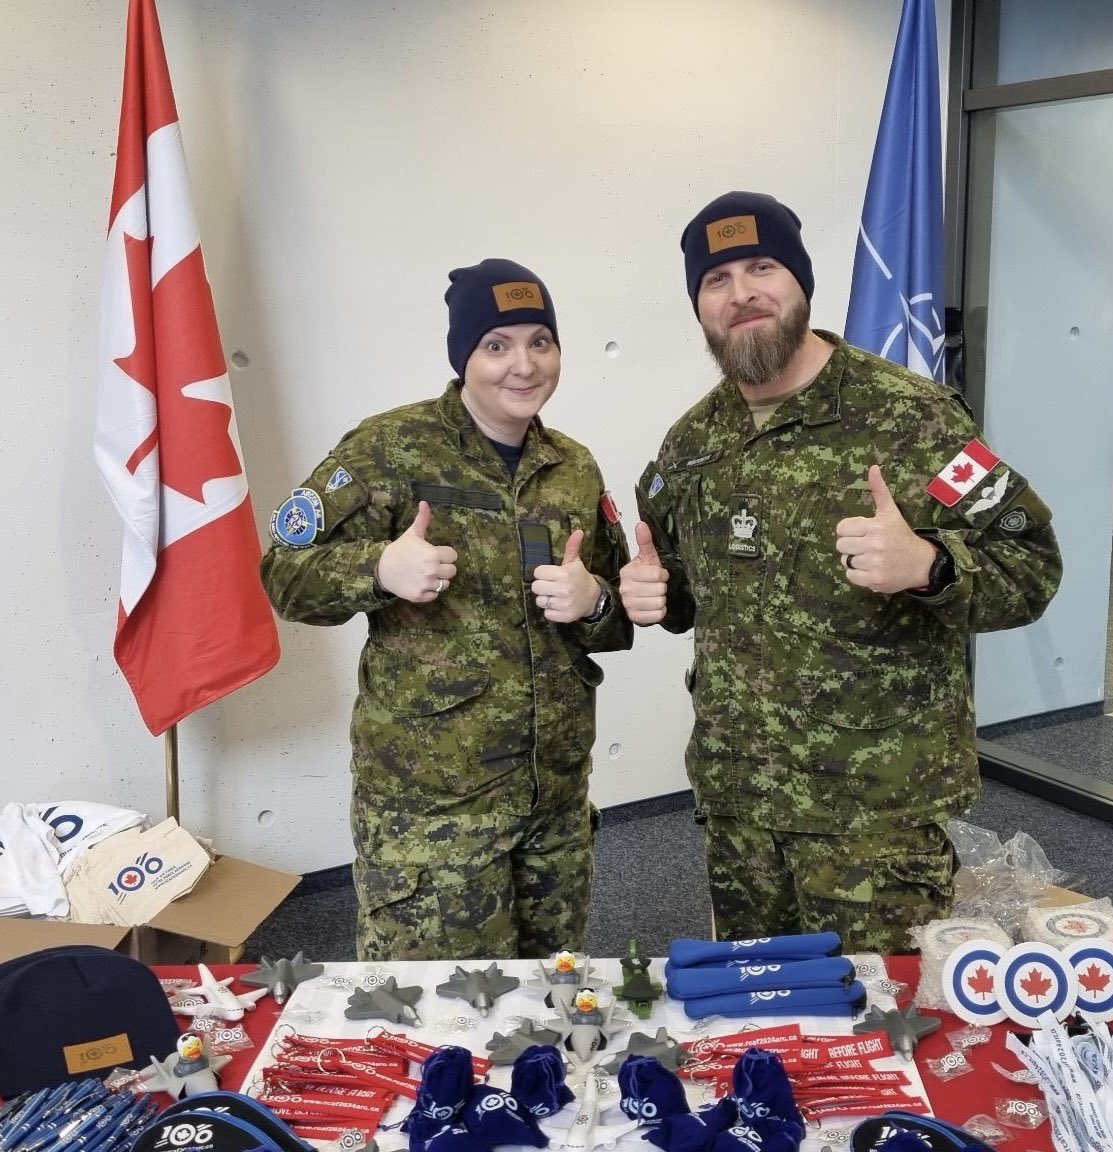 Prepping the swag table with the DCO at today’s NATO Air Chief’s Symposium to help celebrate the #RCAF100.

 I think the ducks piloting the CF18s were the hands-down fan favourite!